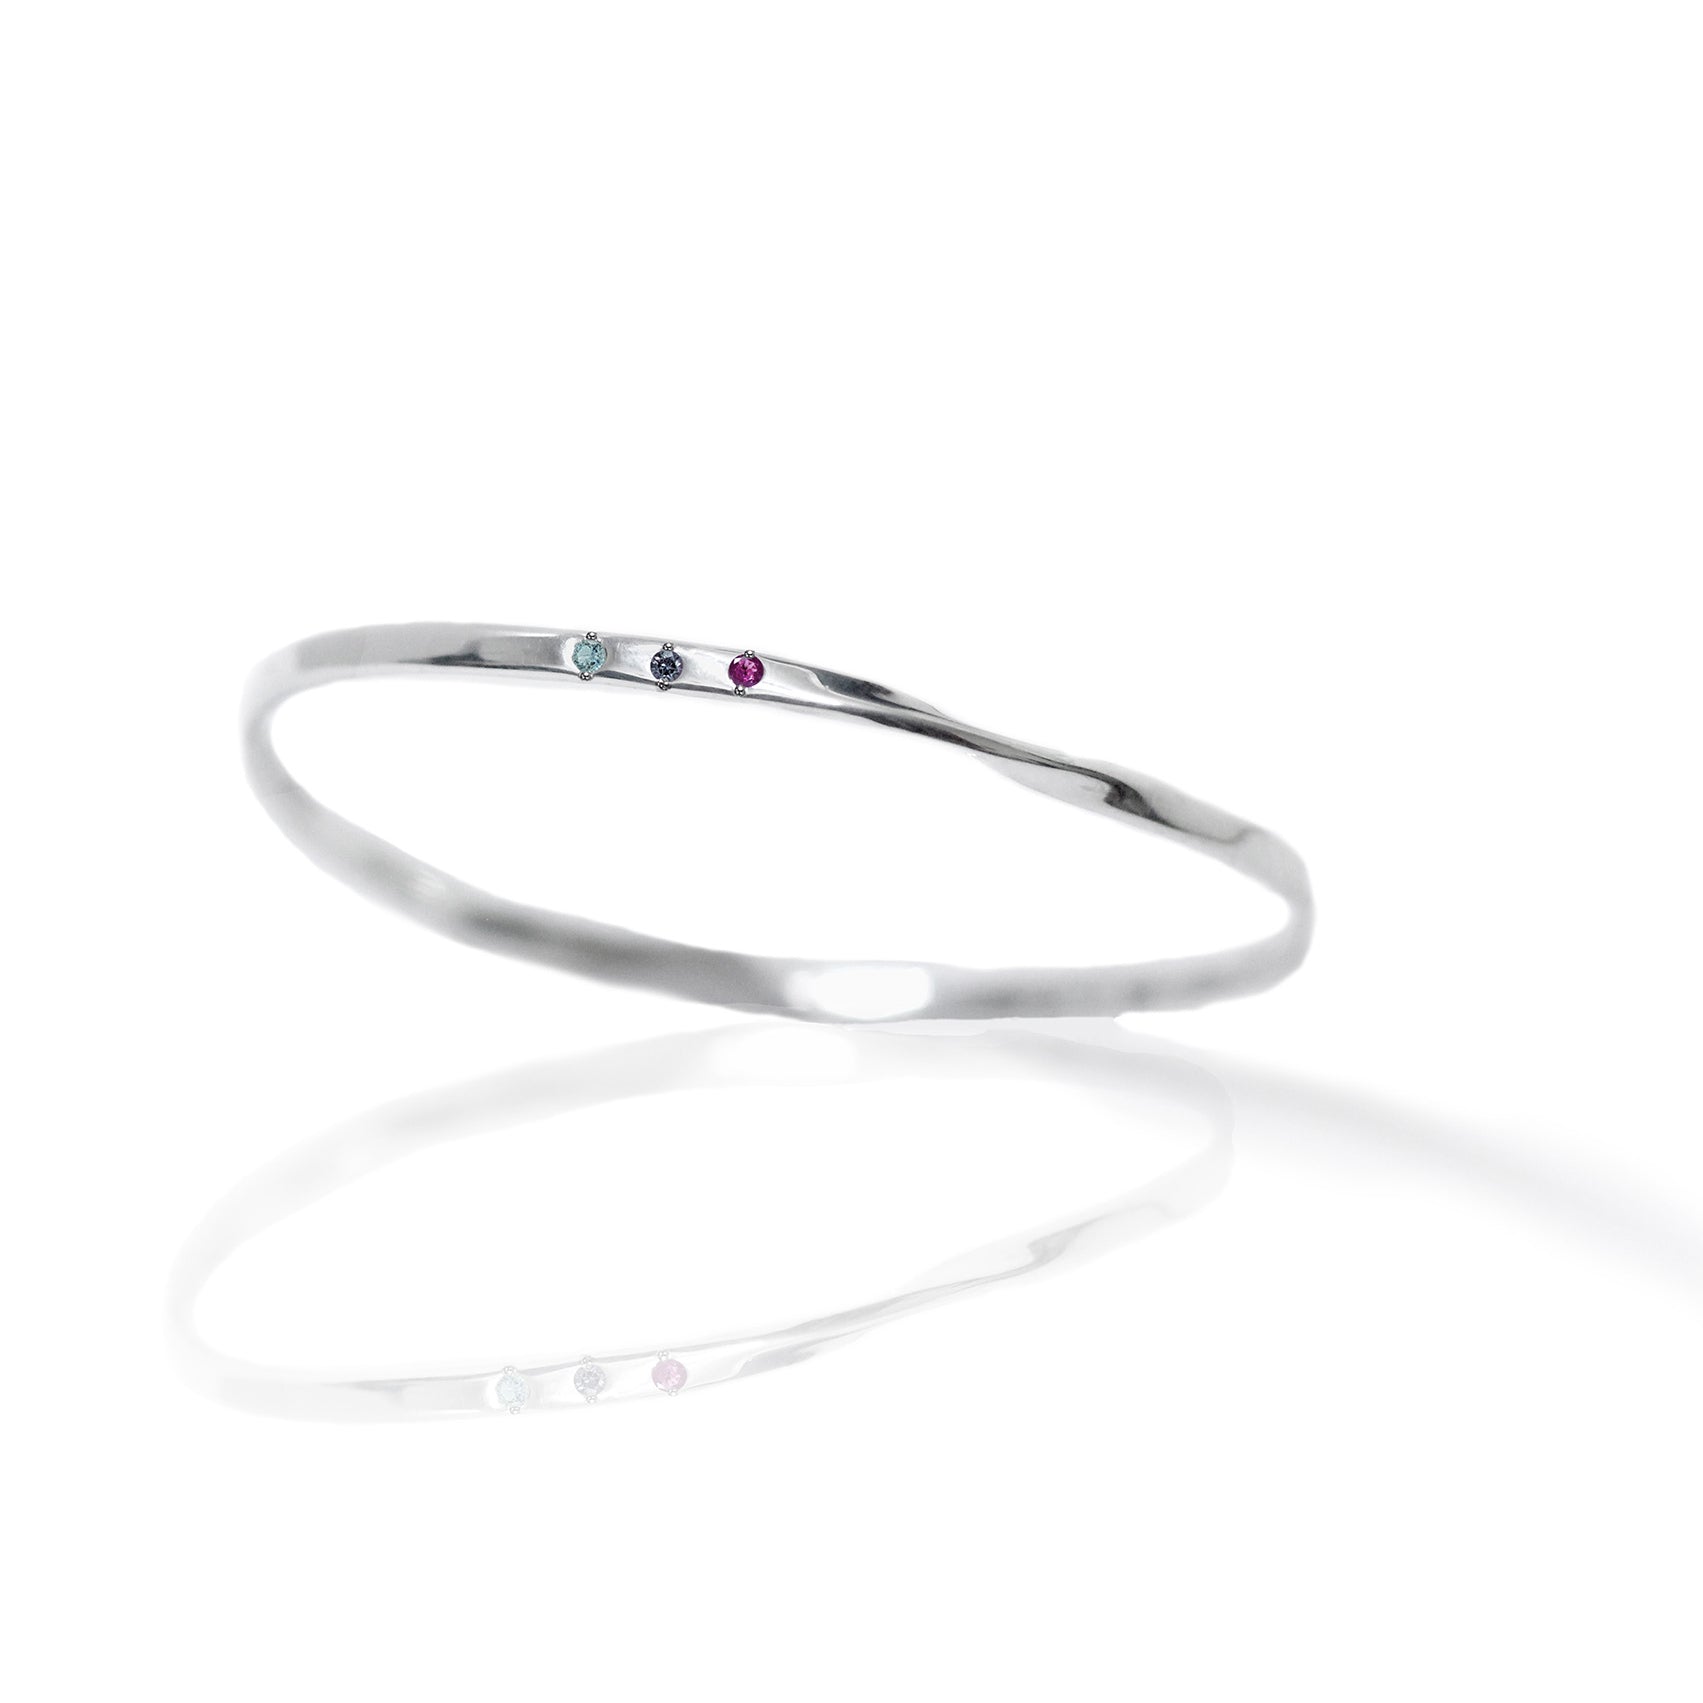 Silver Mobis Bangle with Alexandrite, Ruby and Aquamarine